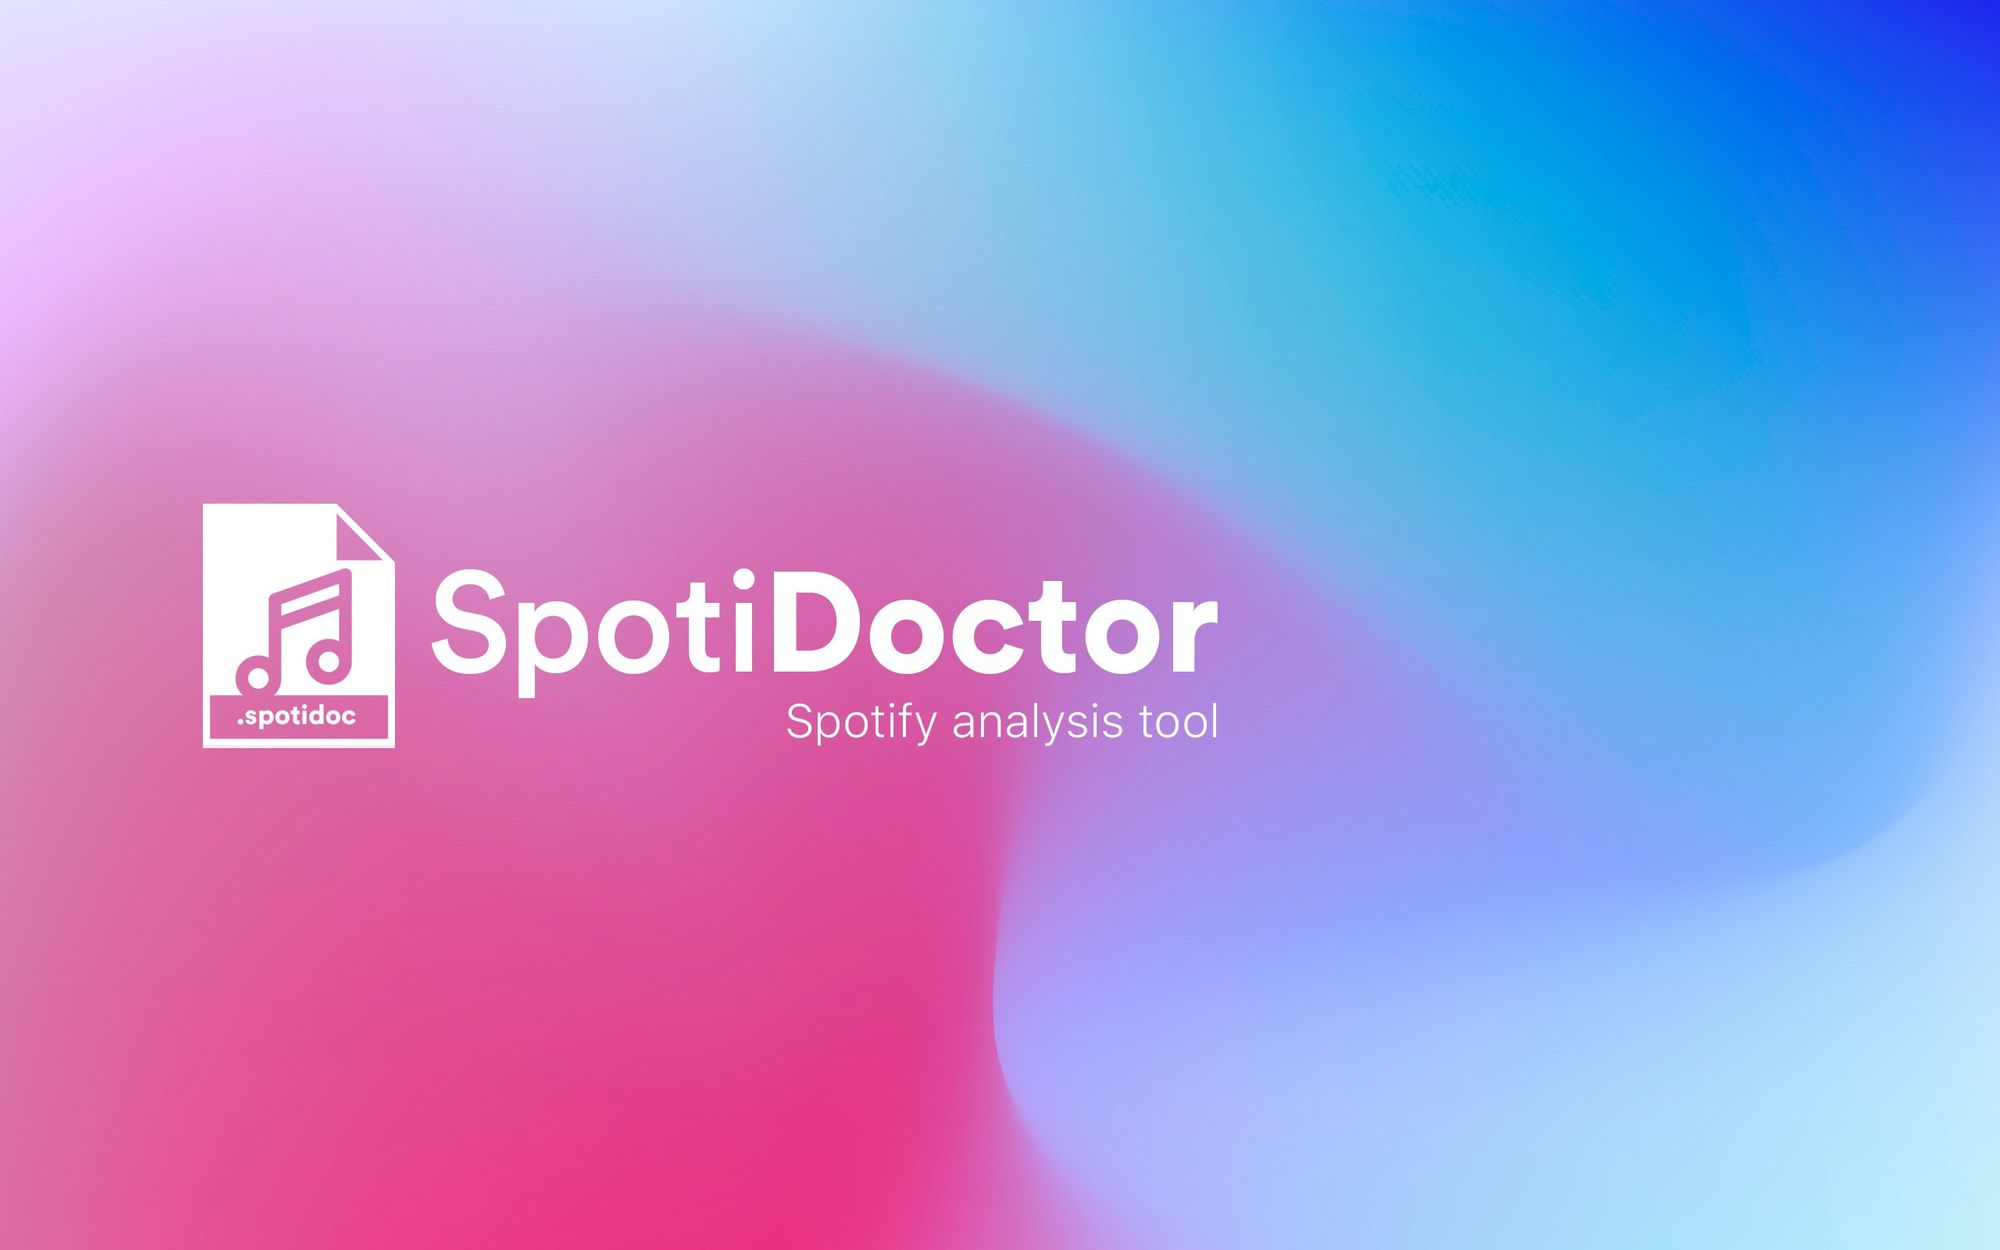 SPOTIDOCTOR - Get your Spotify Prescription and Improve your Numbers